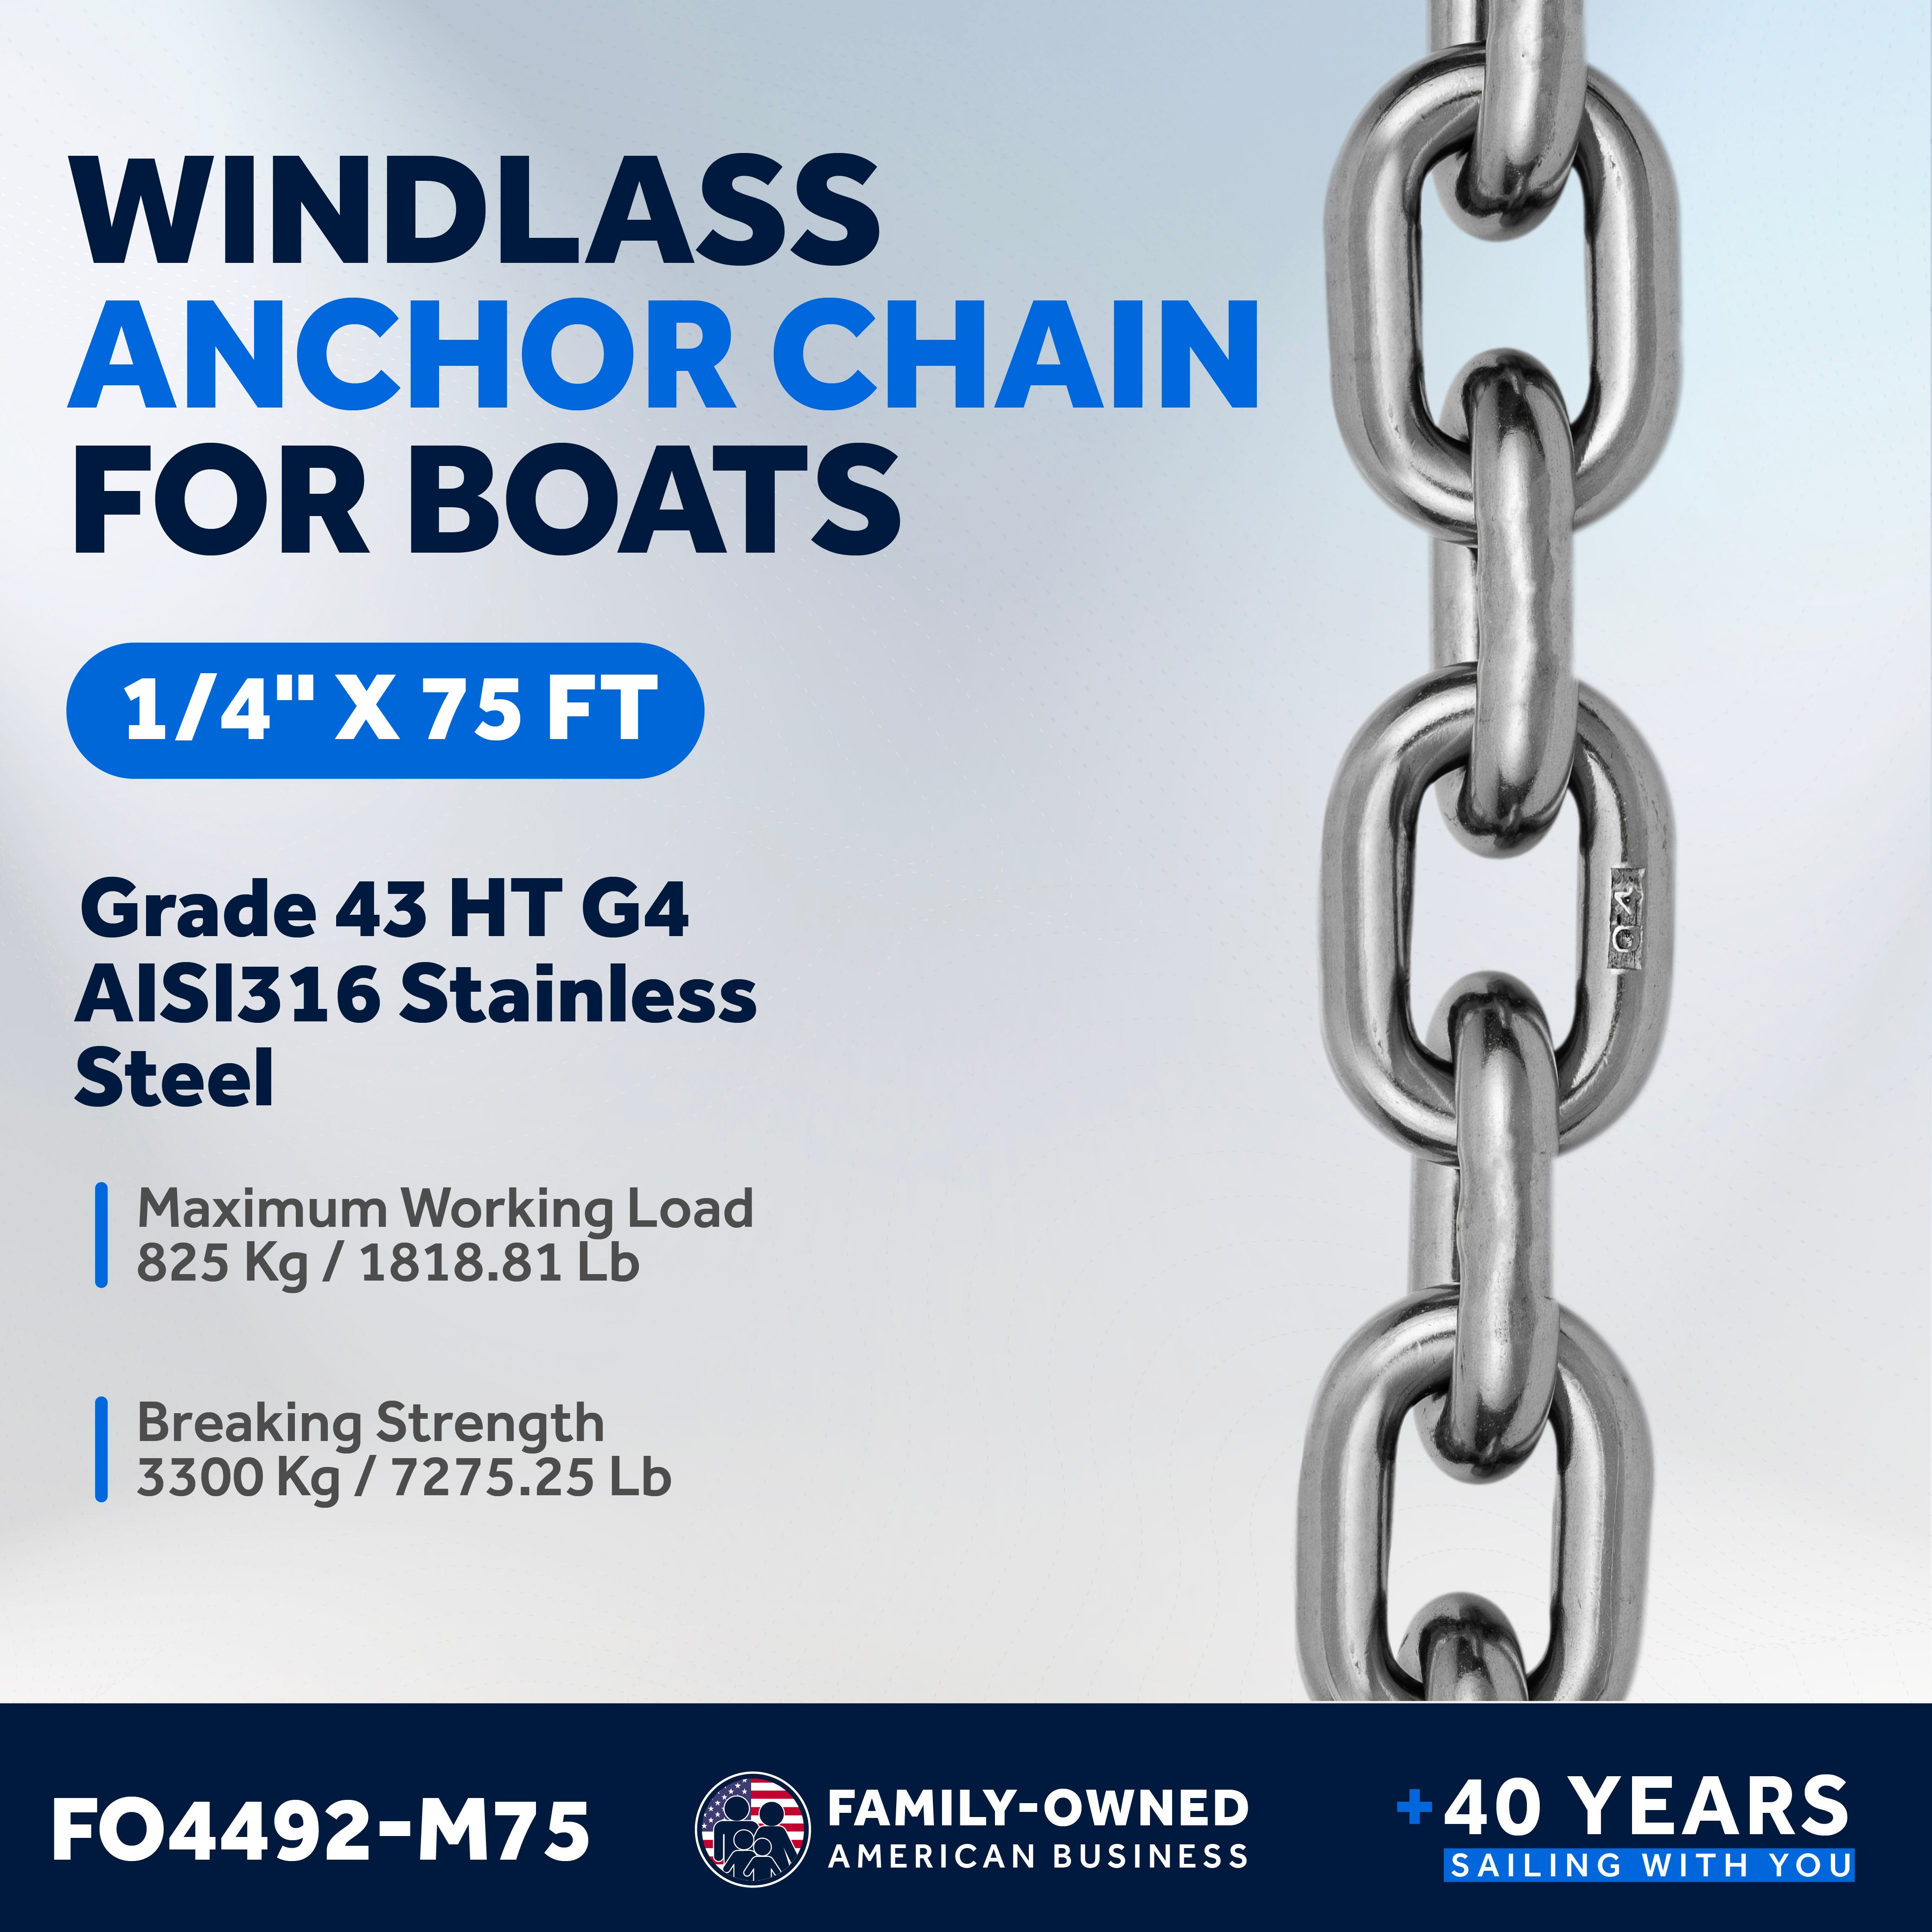 1/4" x 75' Boat Windlass Anchor Chain HT G4 Stainless Steel - FO4492-M75